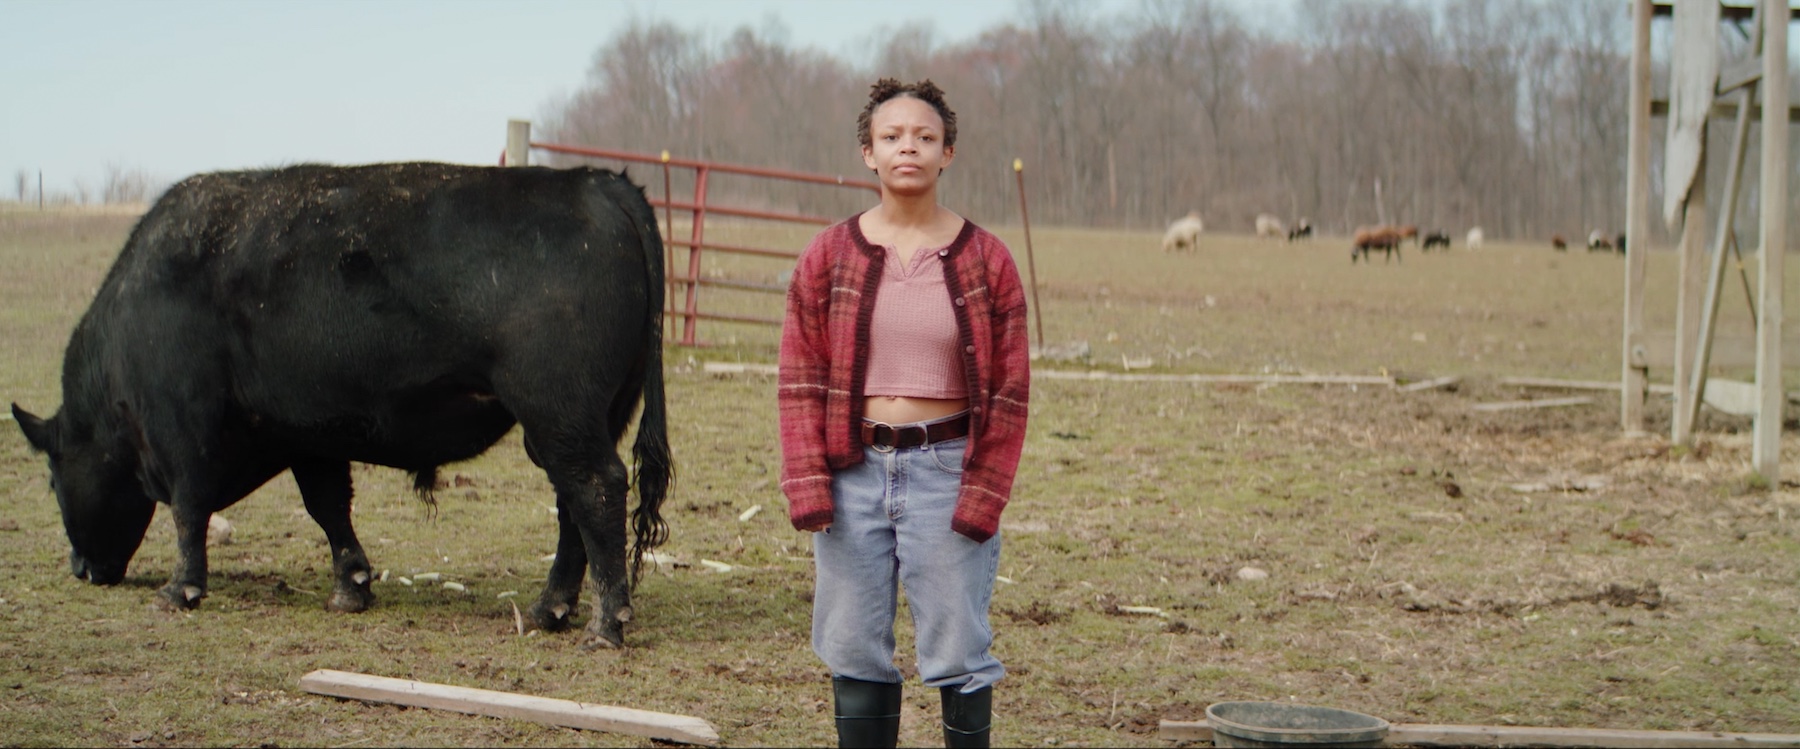 Film still showing actor standing in the middle of the shot with a cow to their left